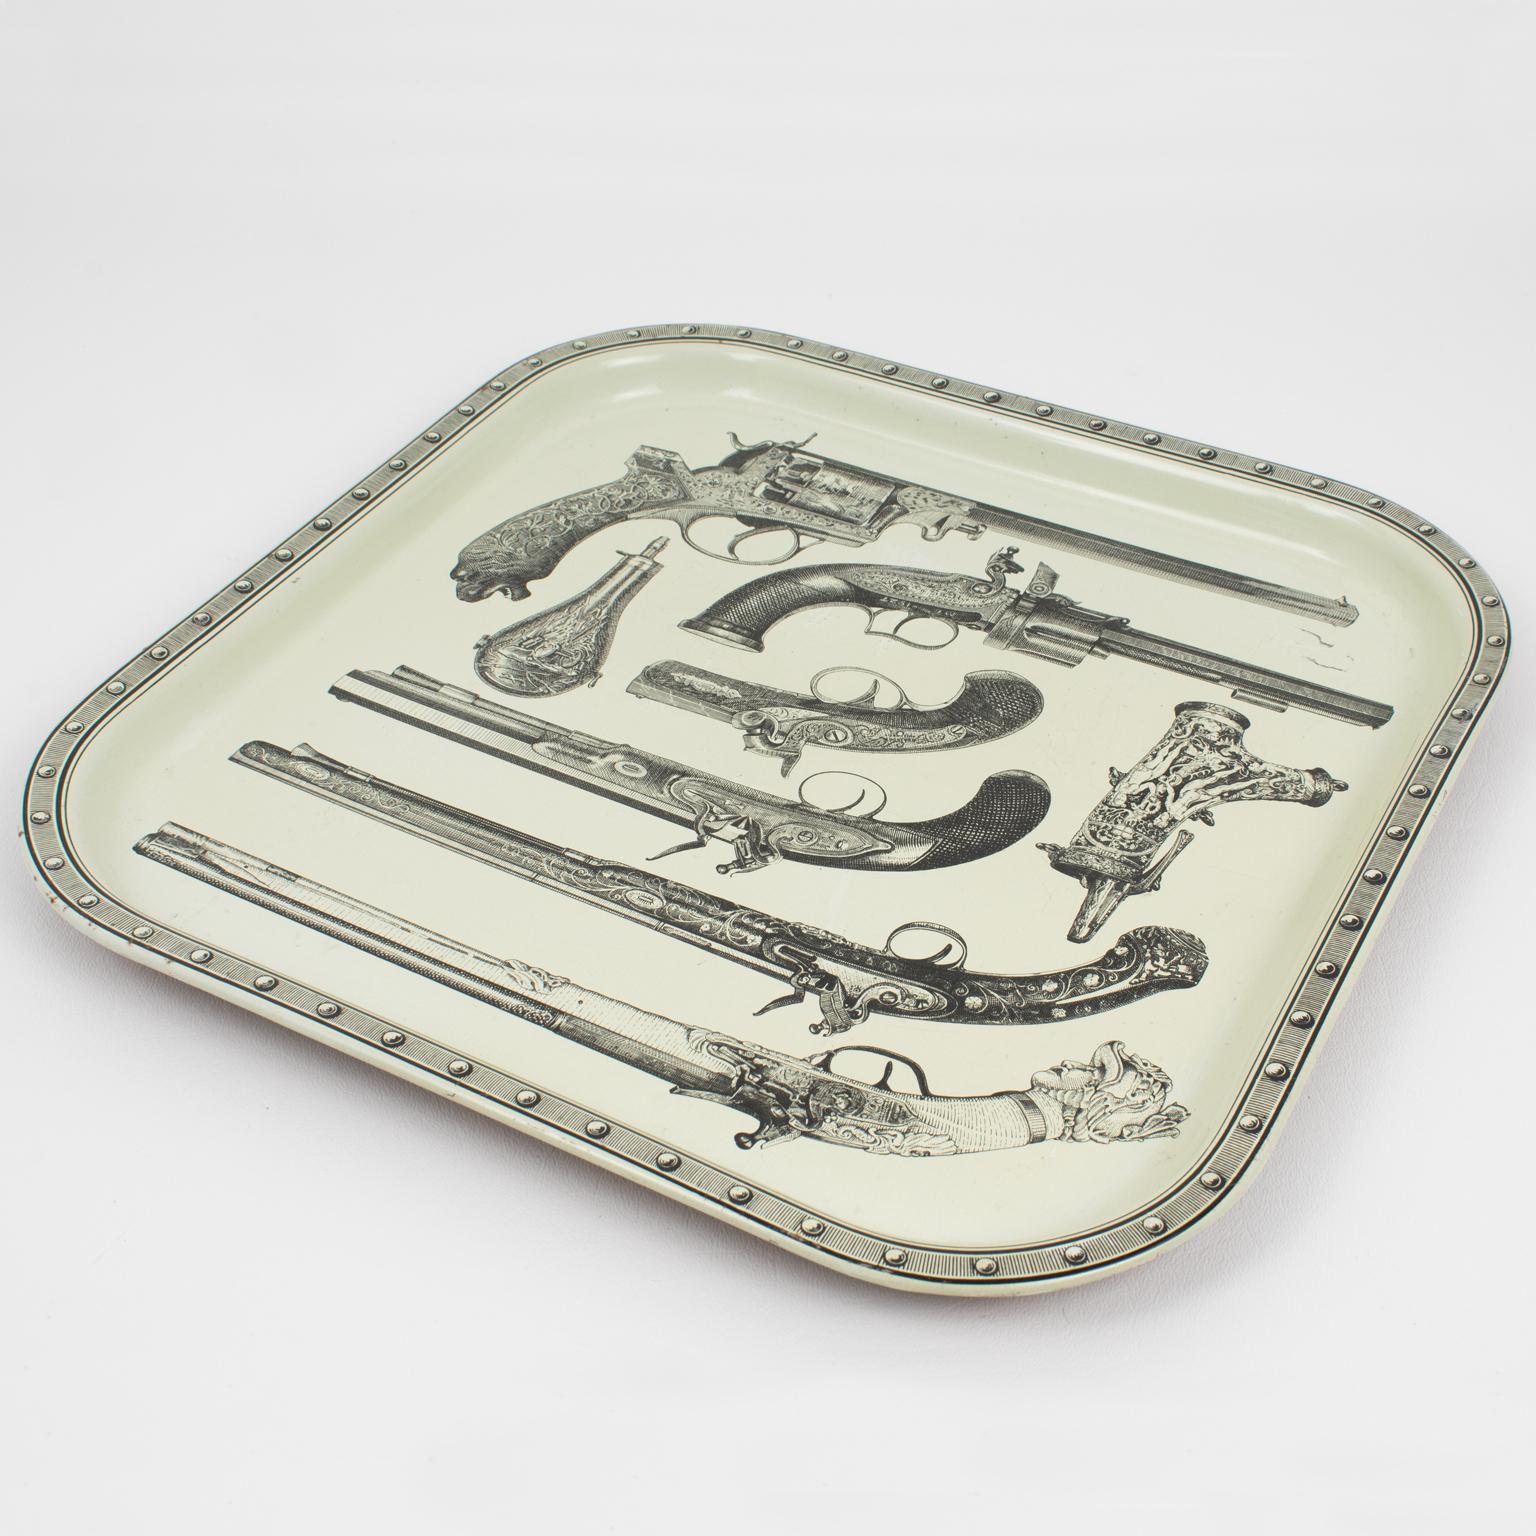 This is a great studio Fornasetti pistol tray from the 1960s. The design is attributed to Piero Fornasetti, Italy. The stylishly decorative enamel square metal tray features a quirky and cool print of antique pistols, firearms, and powder pouches.